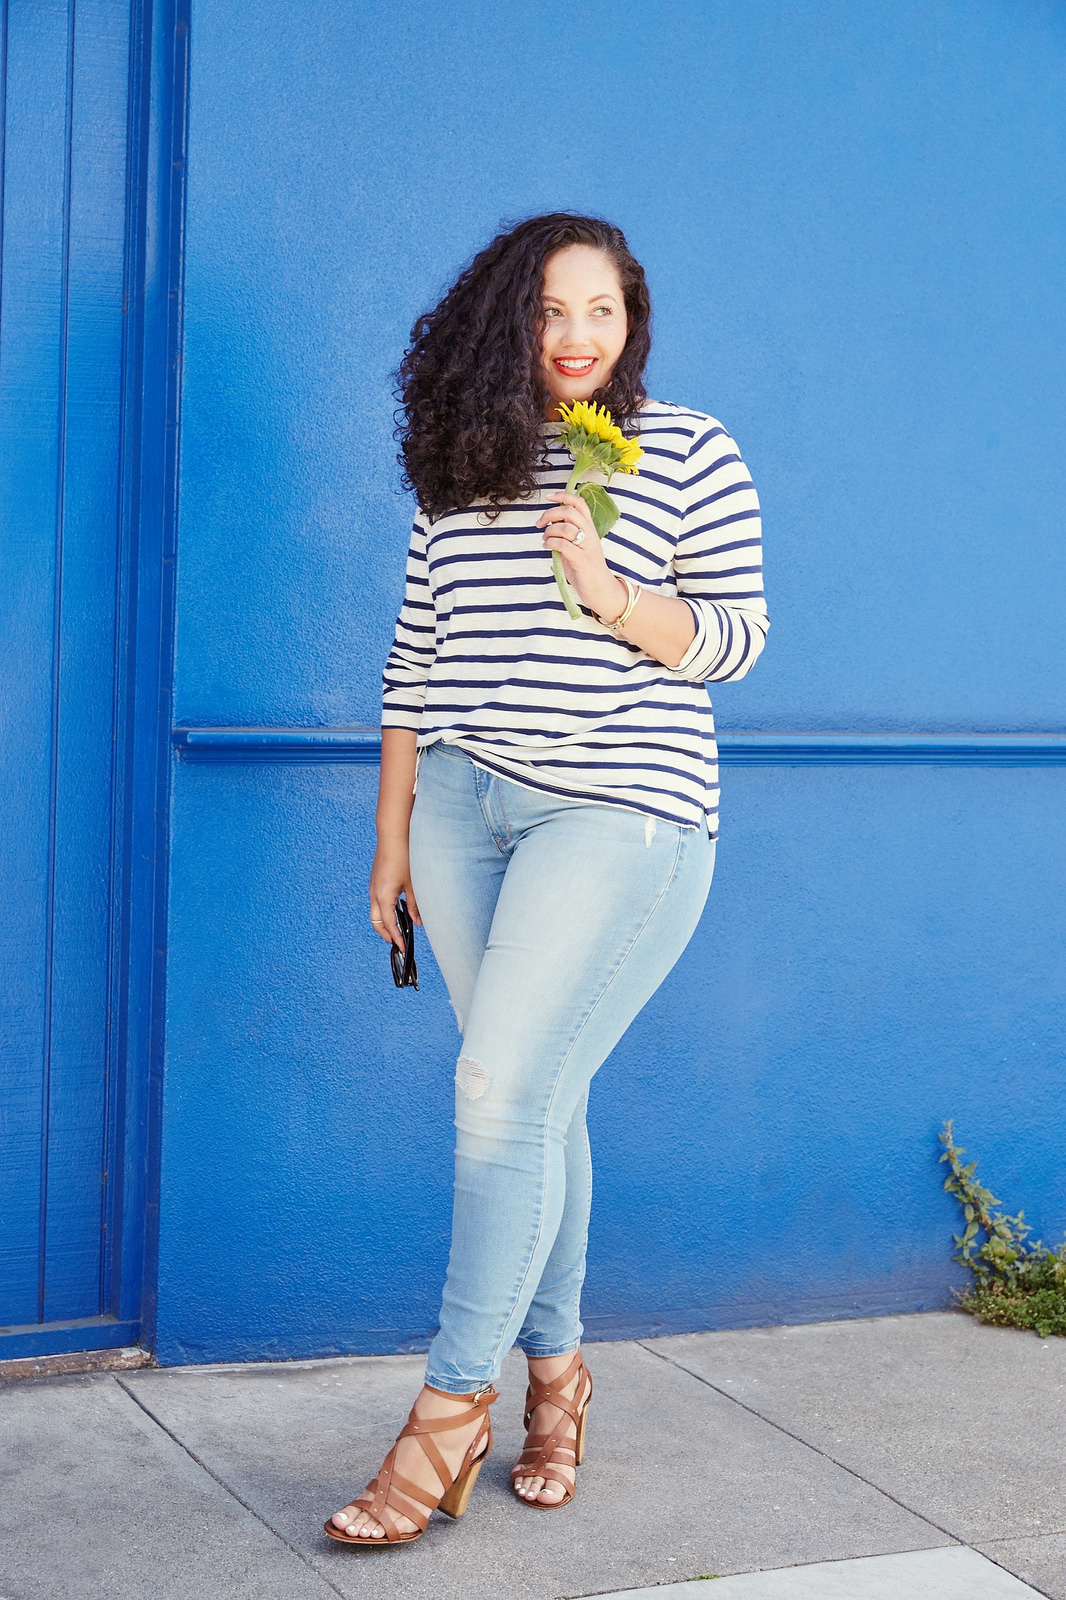 Tanesha Awasthi (also known as Girl With Curves) stars in Old Navy denim campaign wearing a stripe tee and skinny jeans in San Francisco CA.